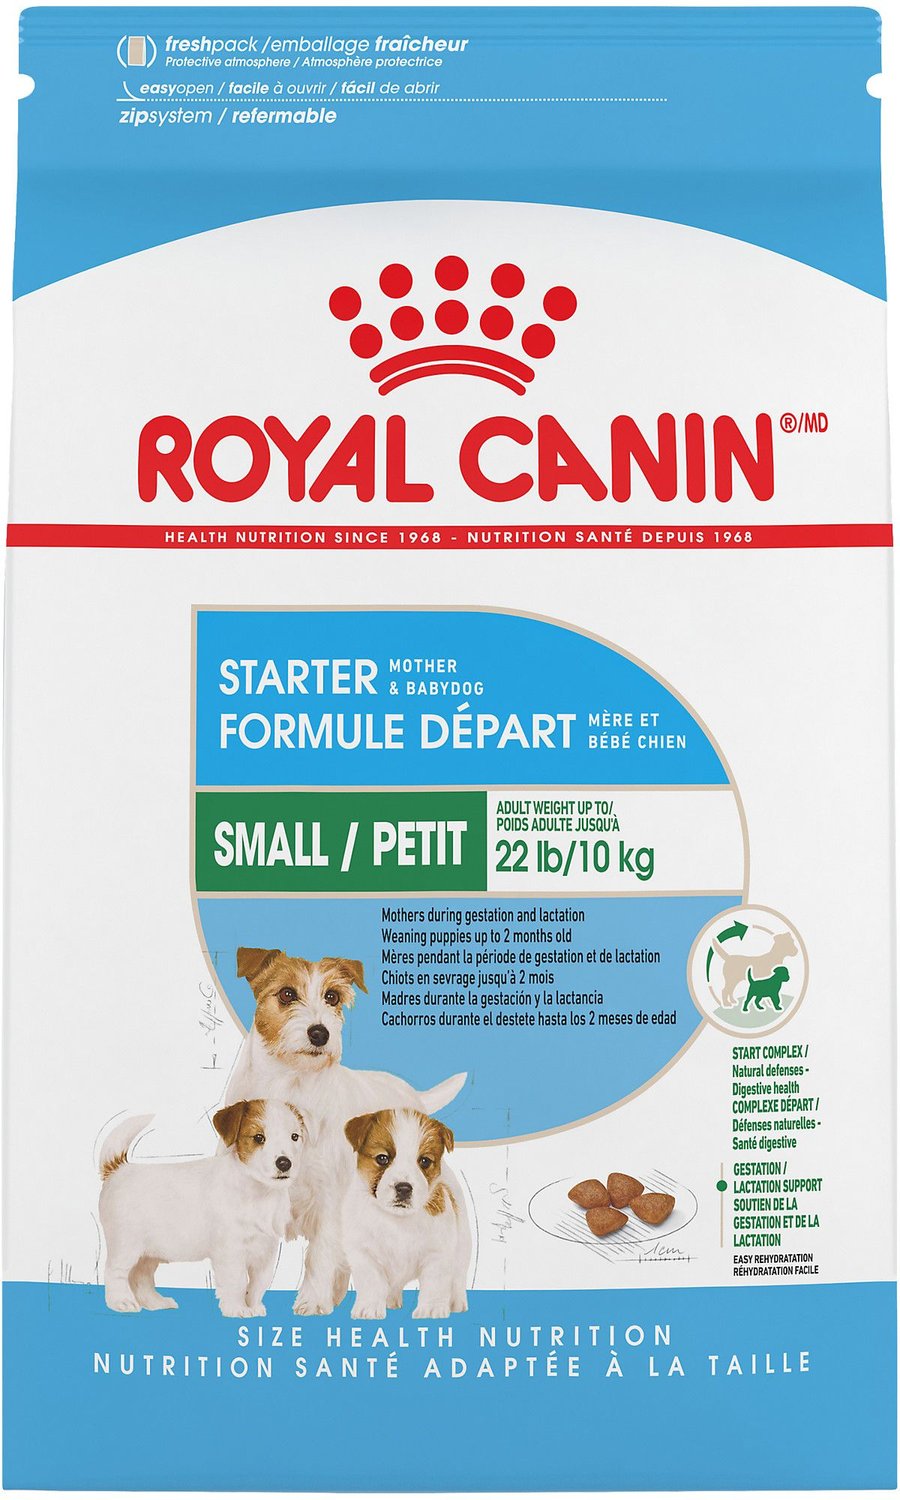 get-promo-codes-for-royal-canin-dog-food-png-promowalls